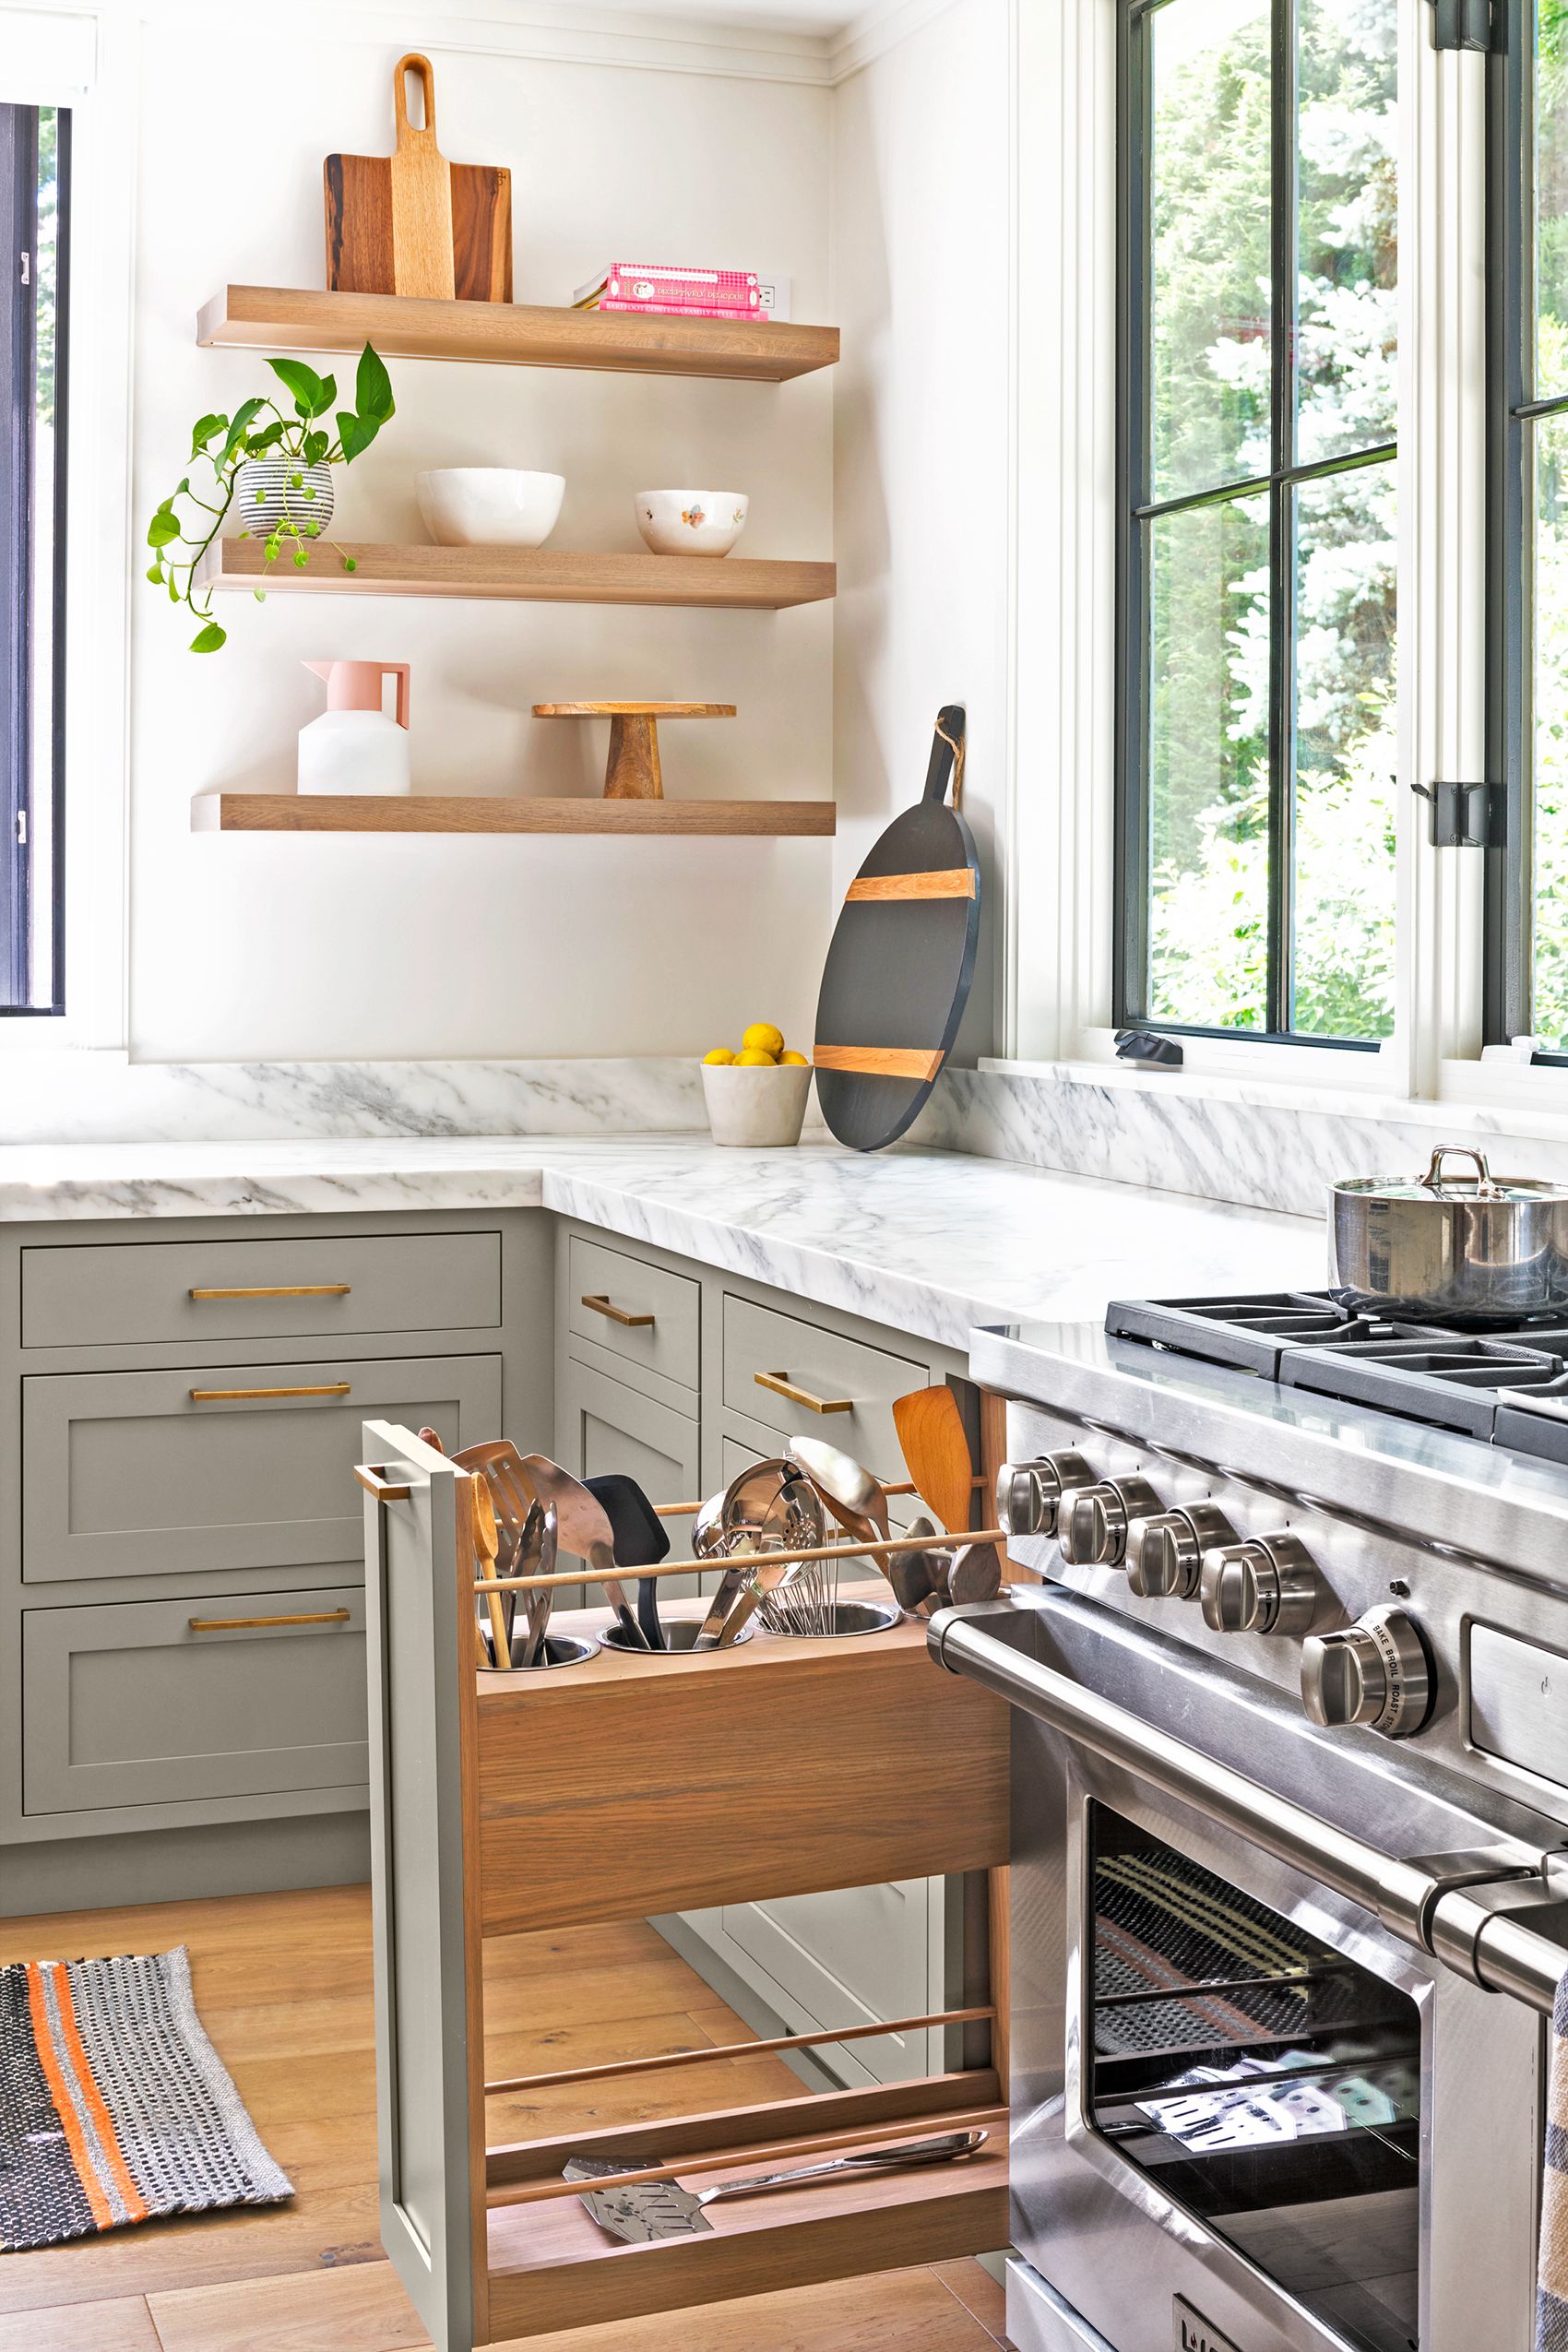 How To Design Kitchen Cabinets And Drawers | www.resnooze.com